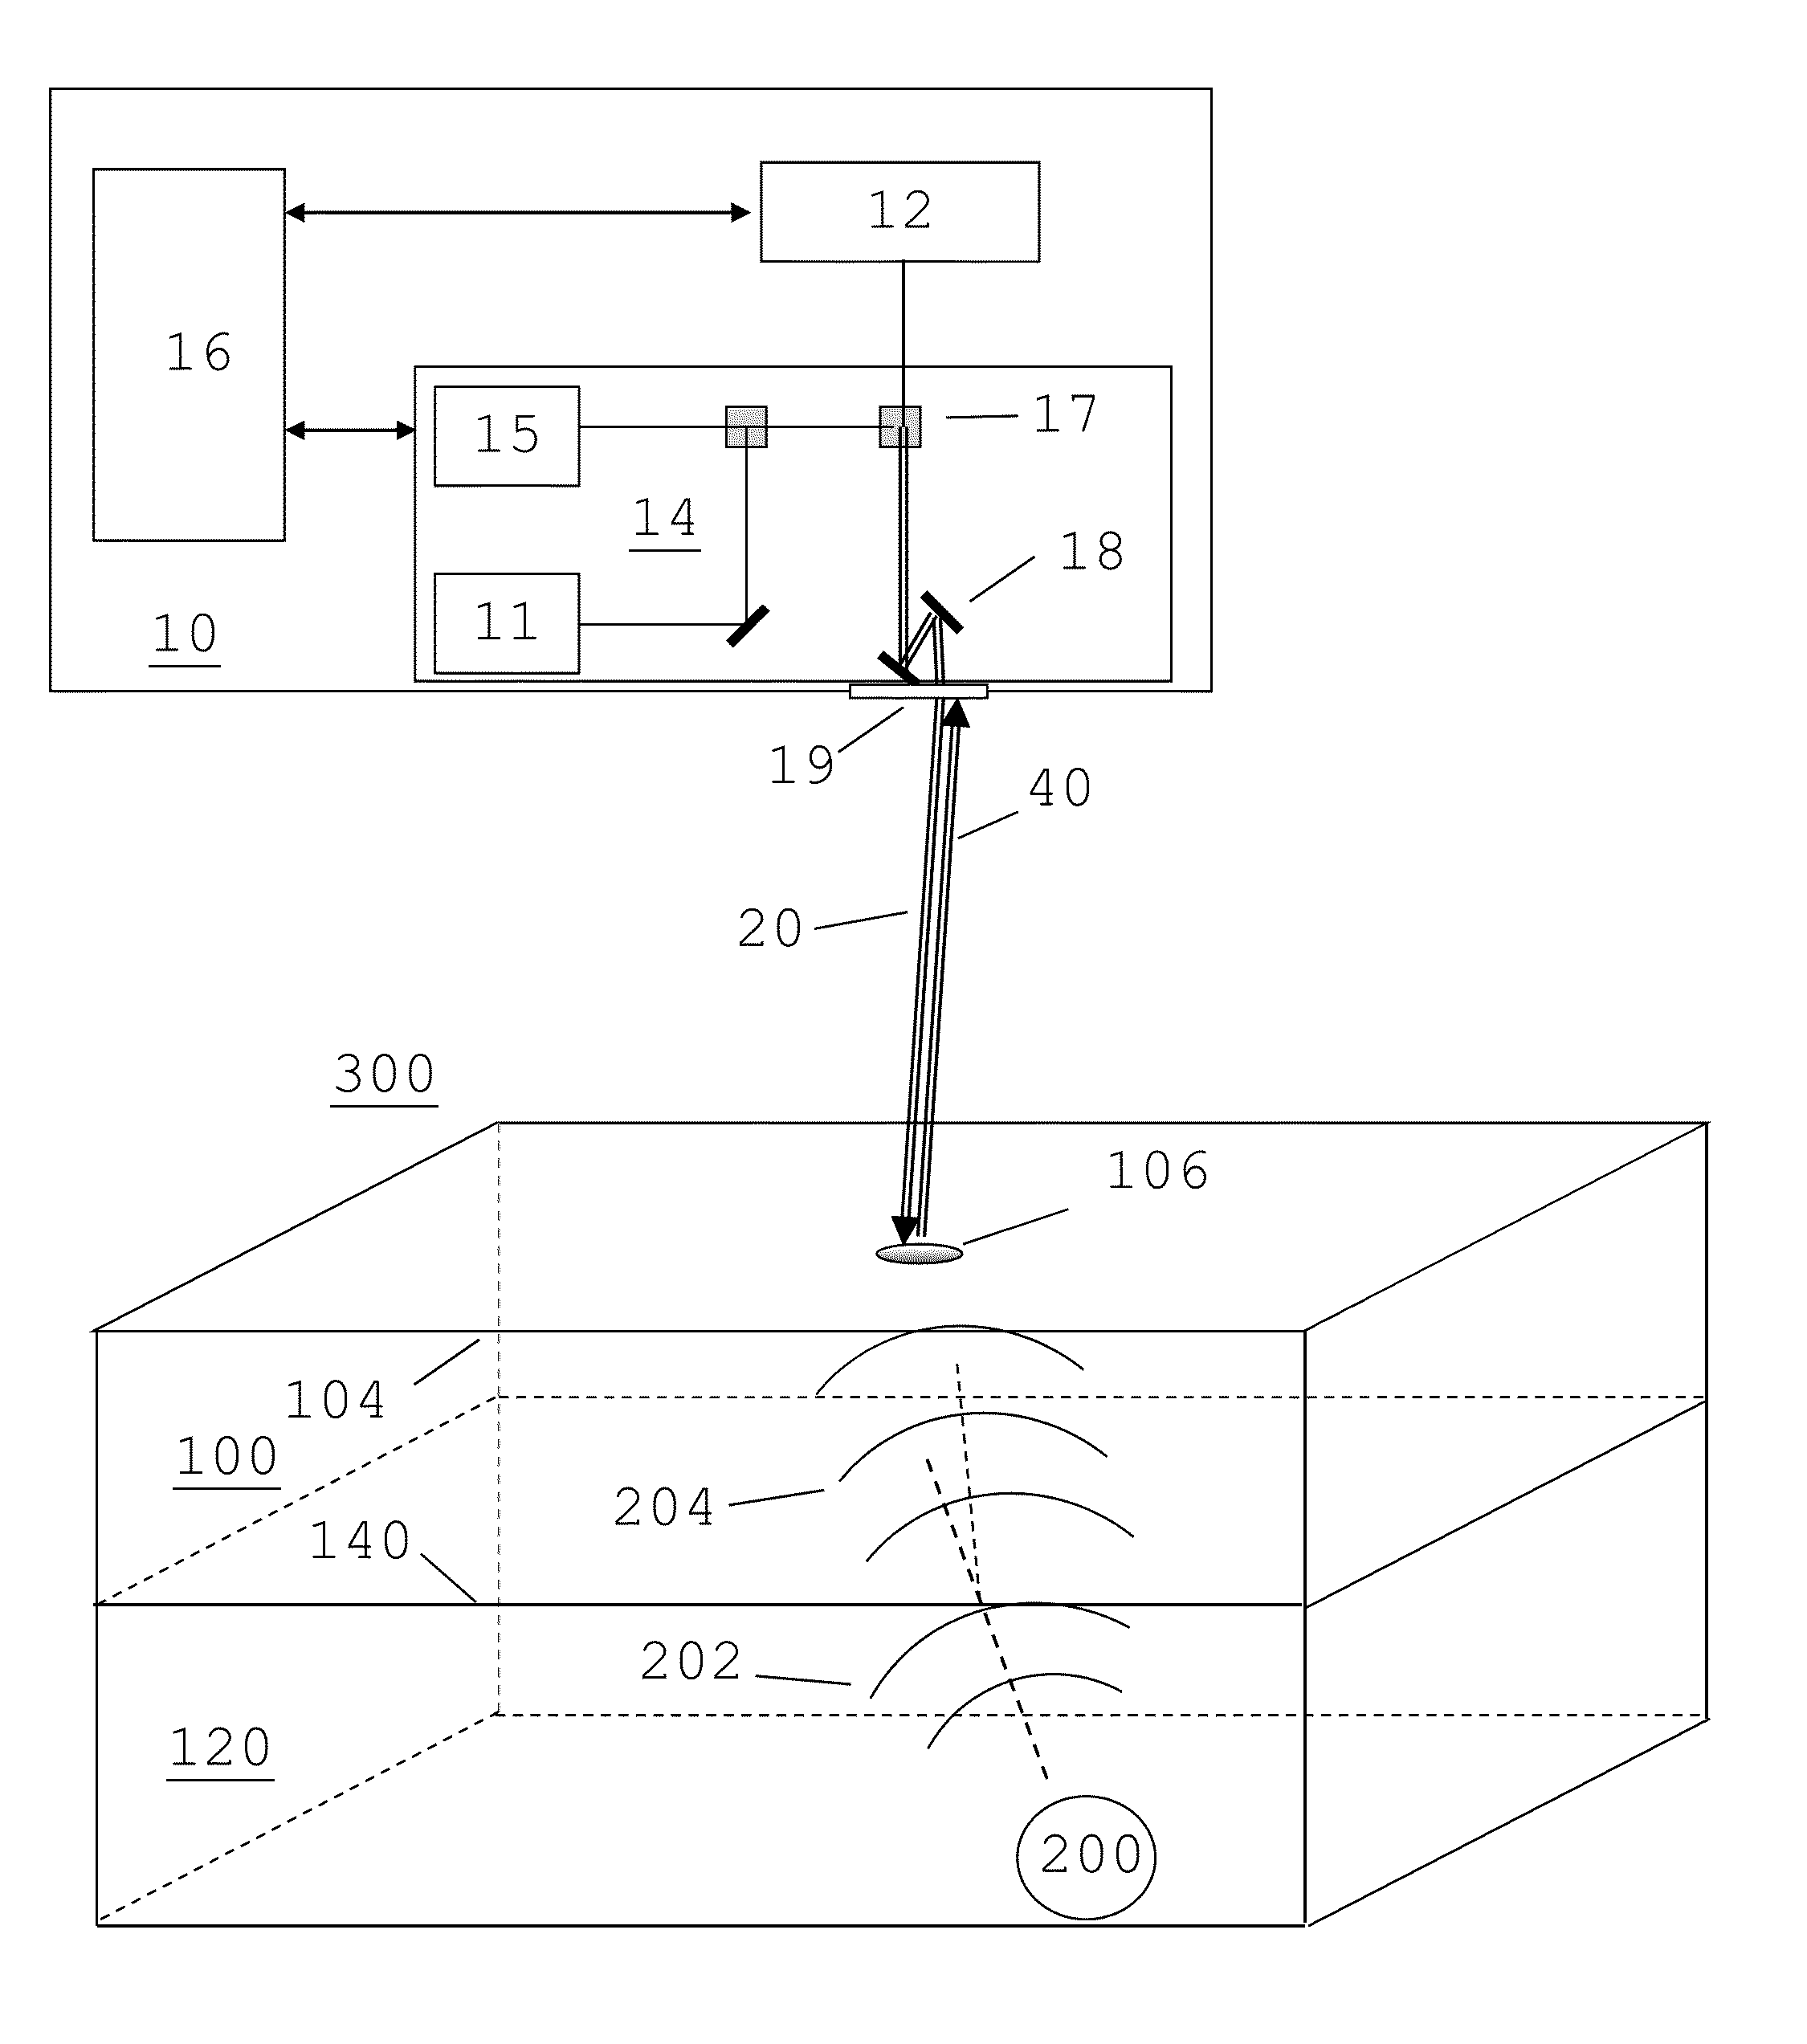 Laser-based method of detecting underwater sound through an ice layer